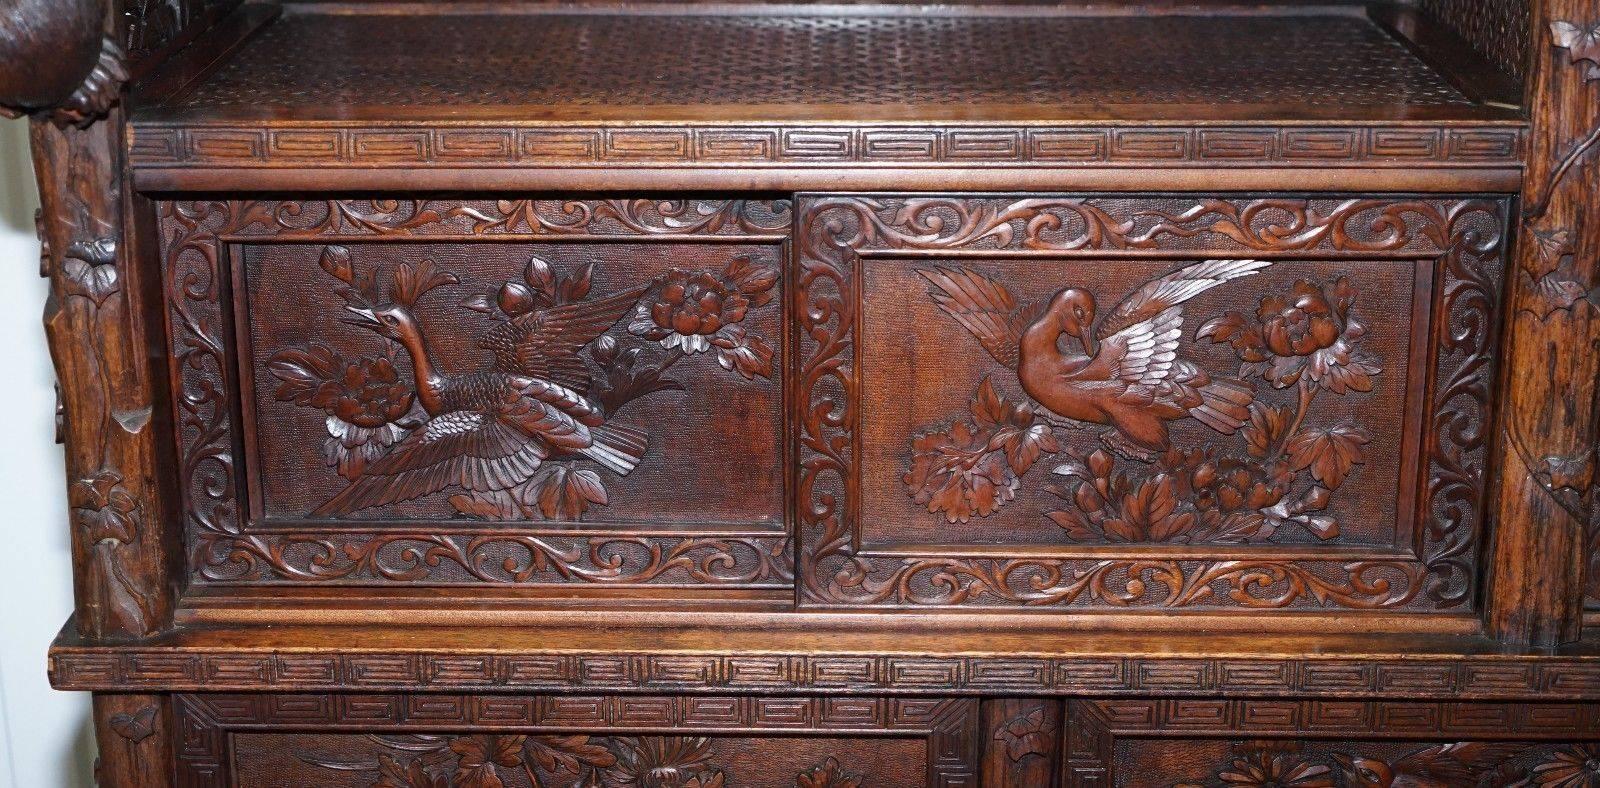 Chinese Export Rare Antique Hand-Carved Chinese Cabinet with Monkeys Sideboard Bookcase Drawers